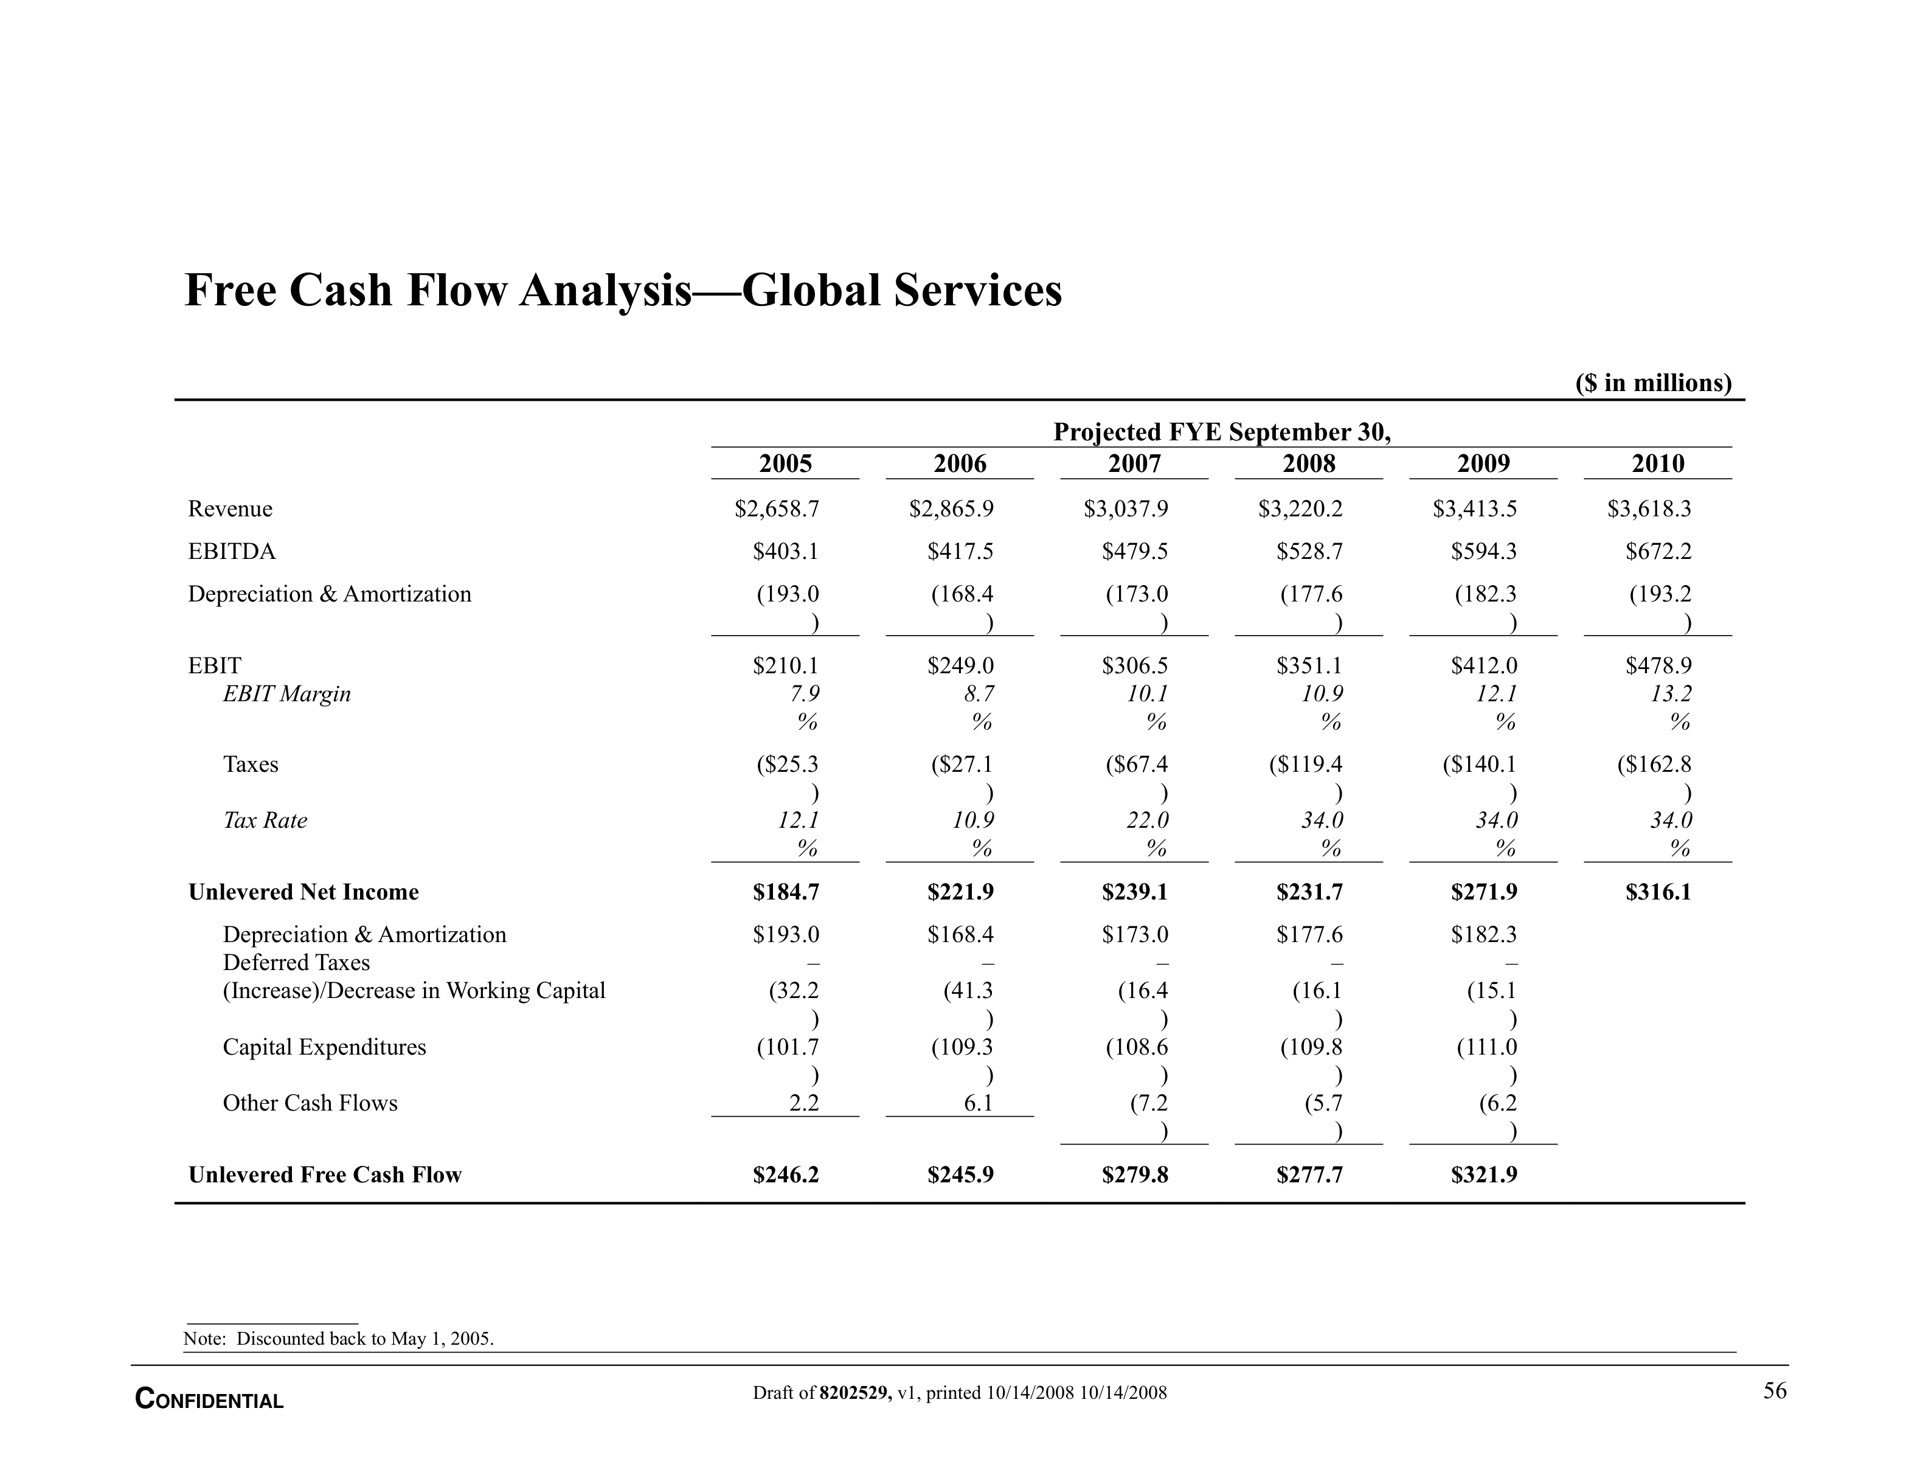 free cash flow analysis global services | Bear Stearns